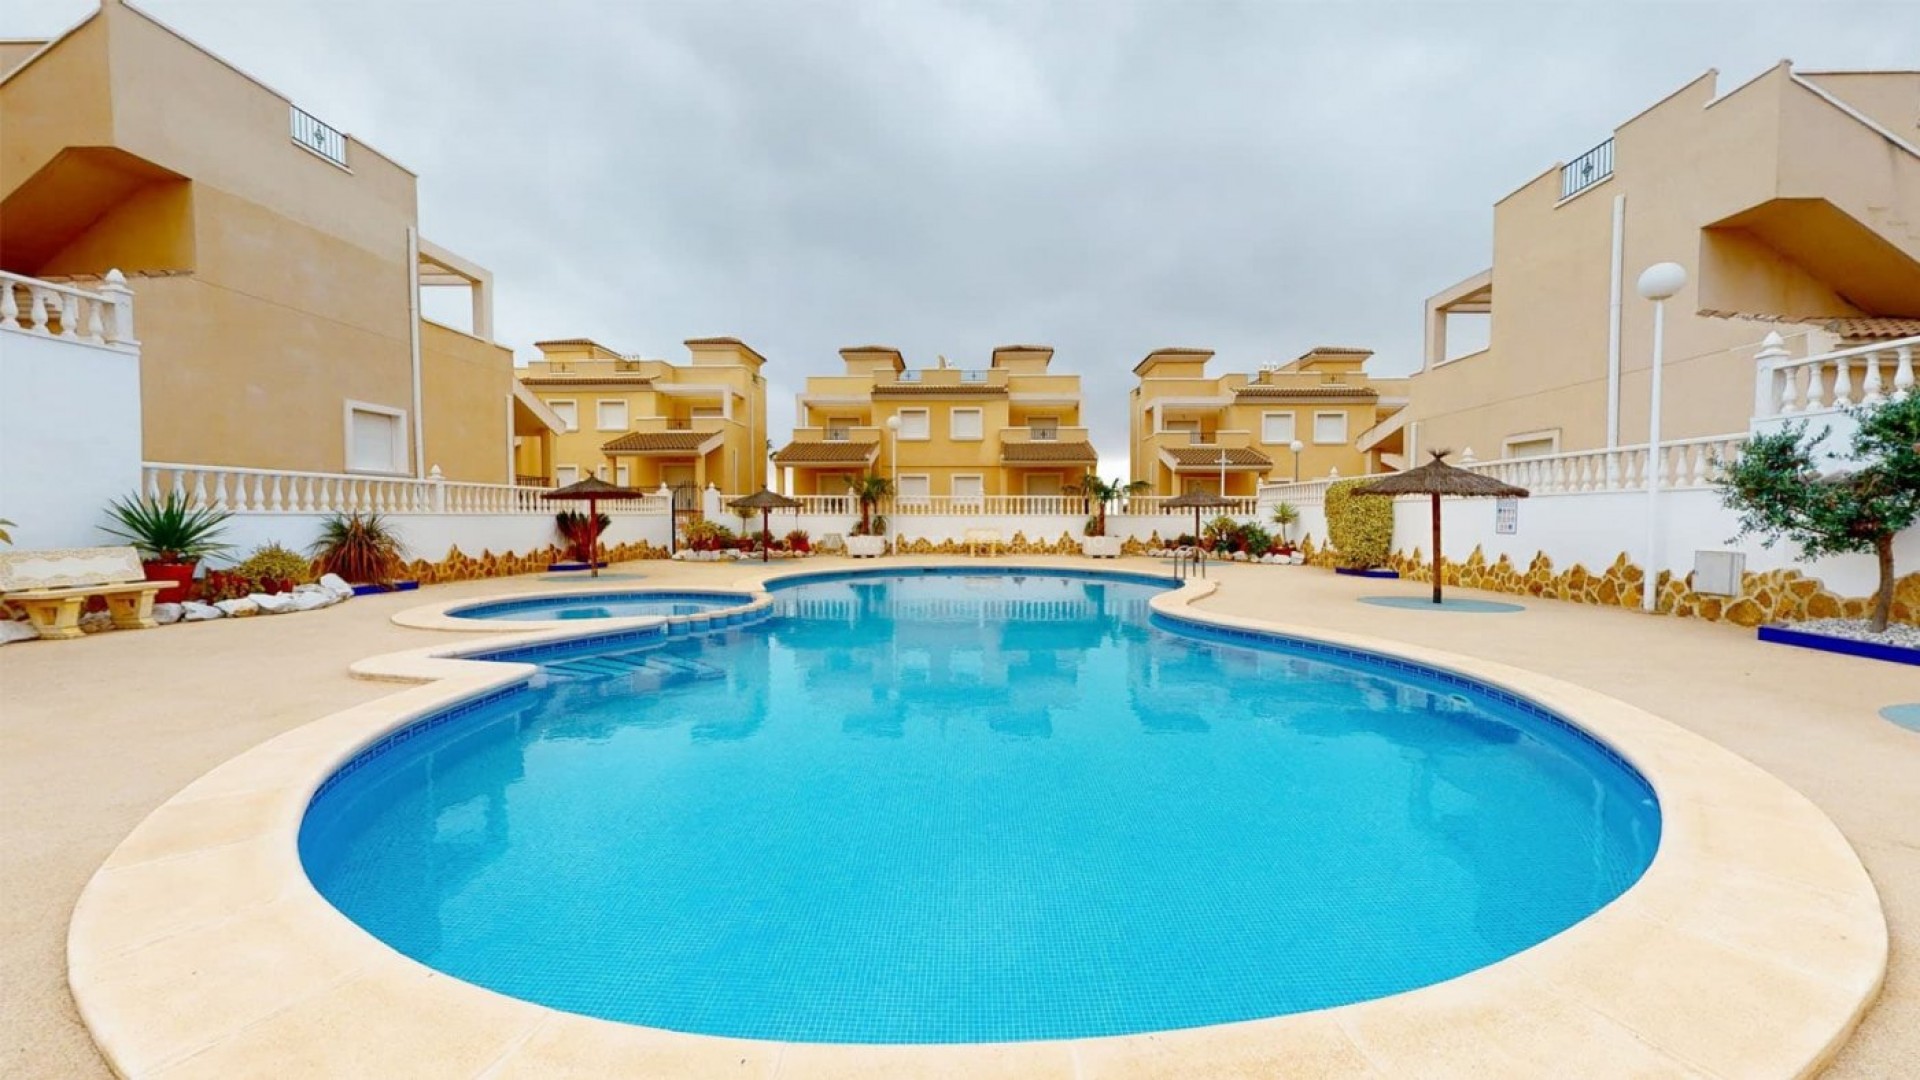 Turnkey townhouses in Cerro del Sol, San Miguel de Salinas, 3 bedrooms, 2 bathrooms, 6 km from Torrevieja, large gardens, private sun terraces, communal pool